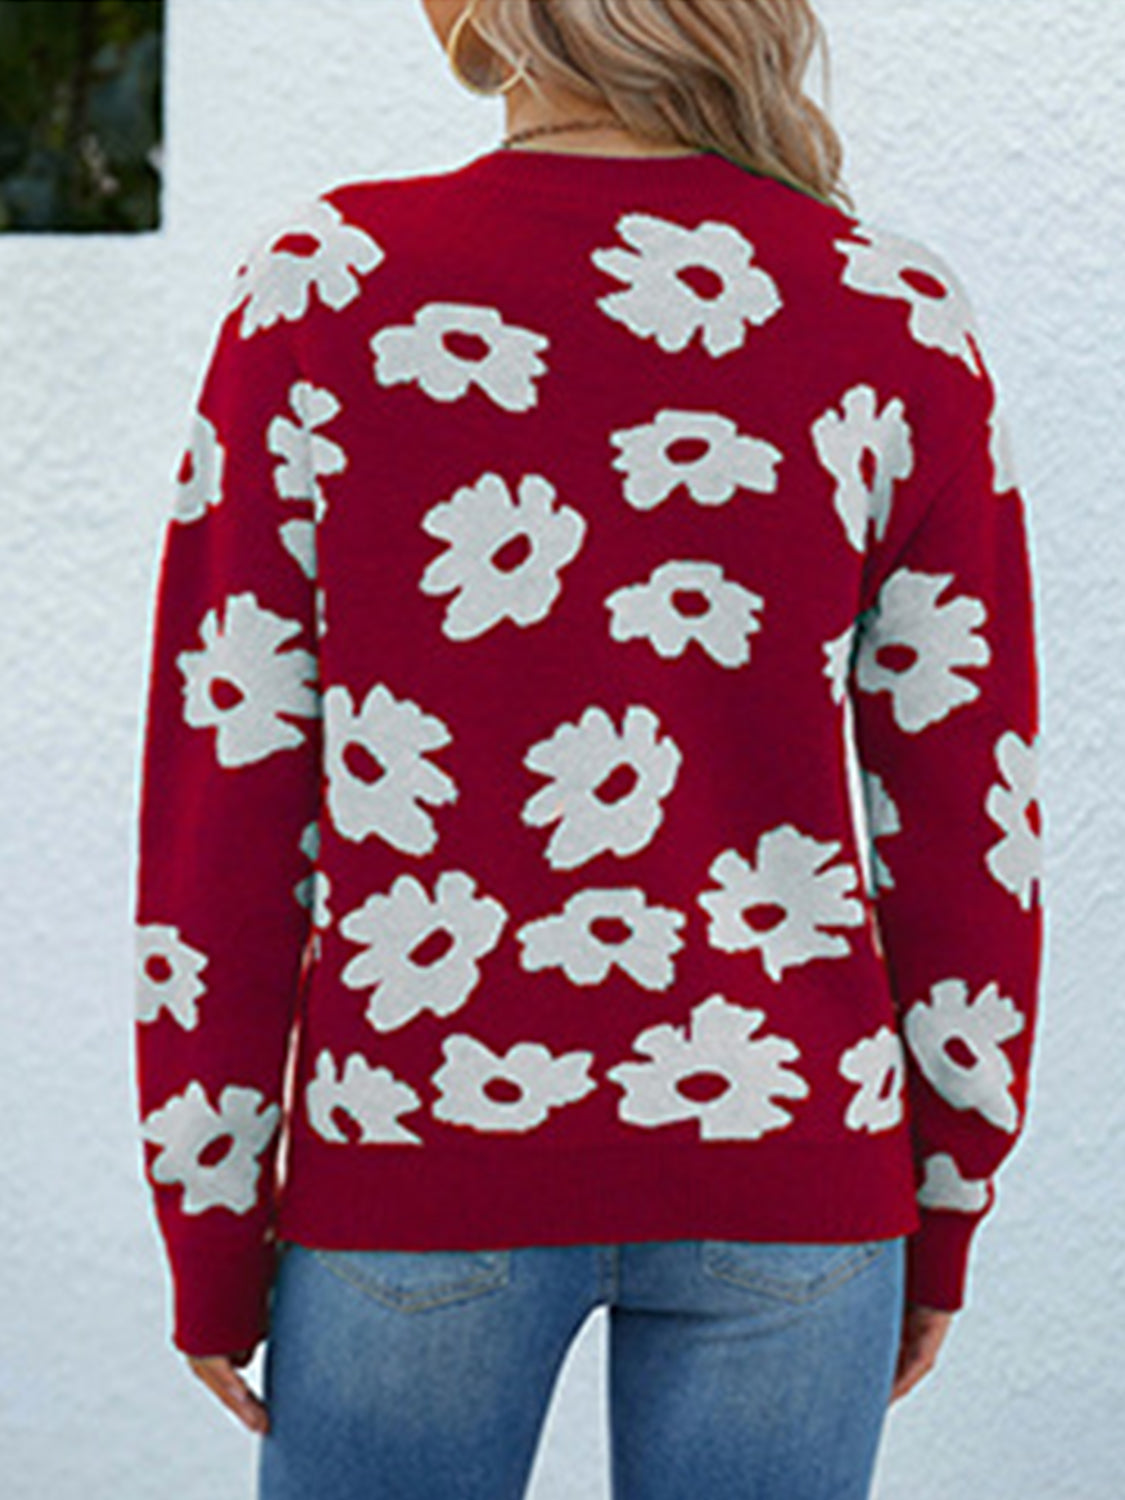 Knit Daisy Retro Flower Pullover Classic Long Sleeve Round Neck Sweater Shirt